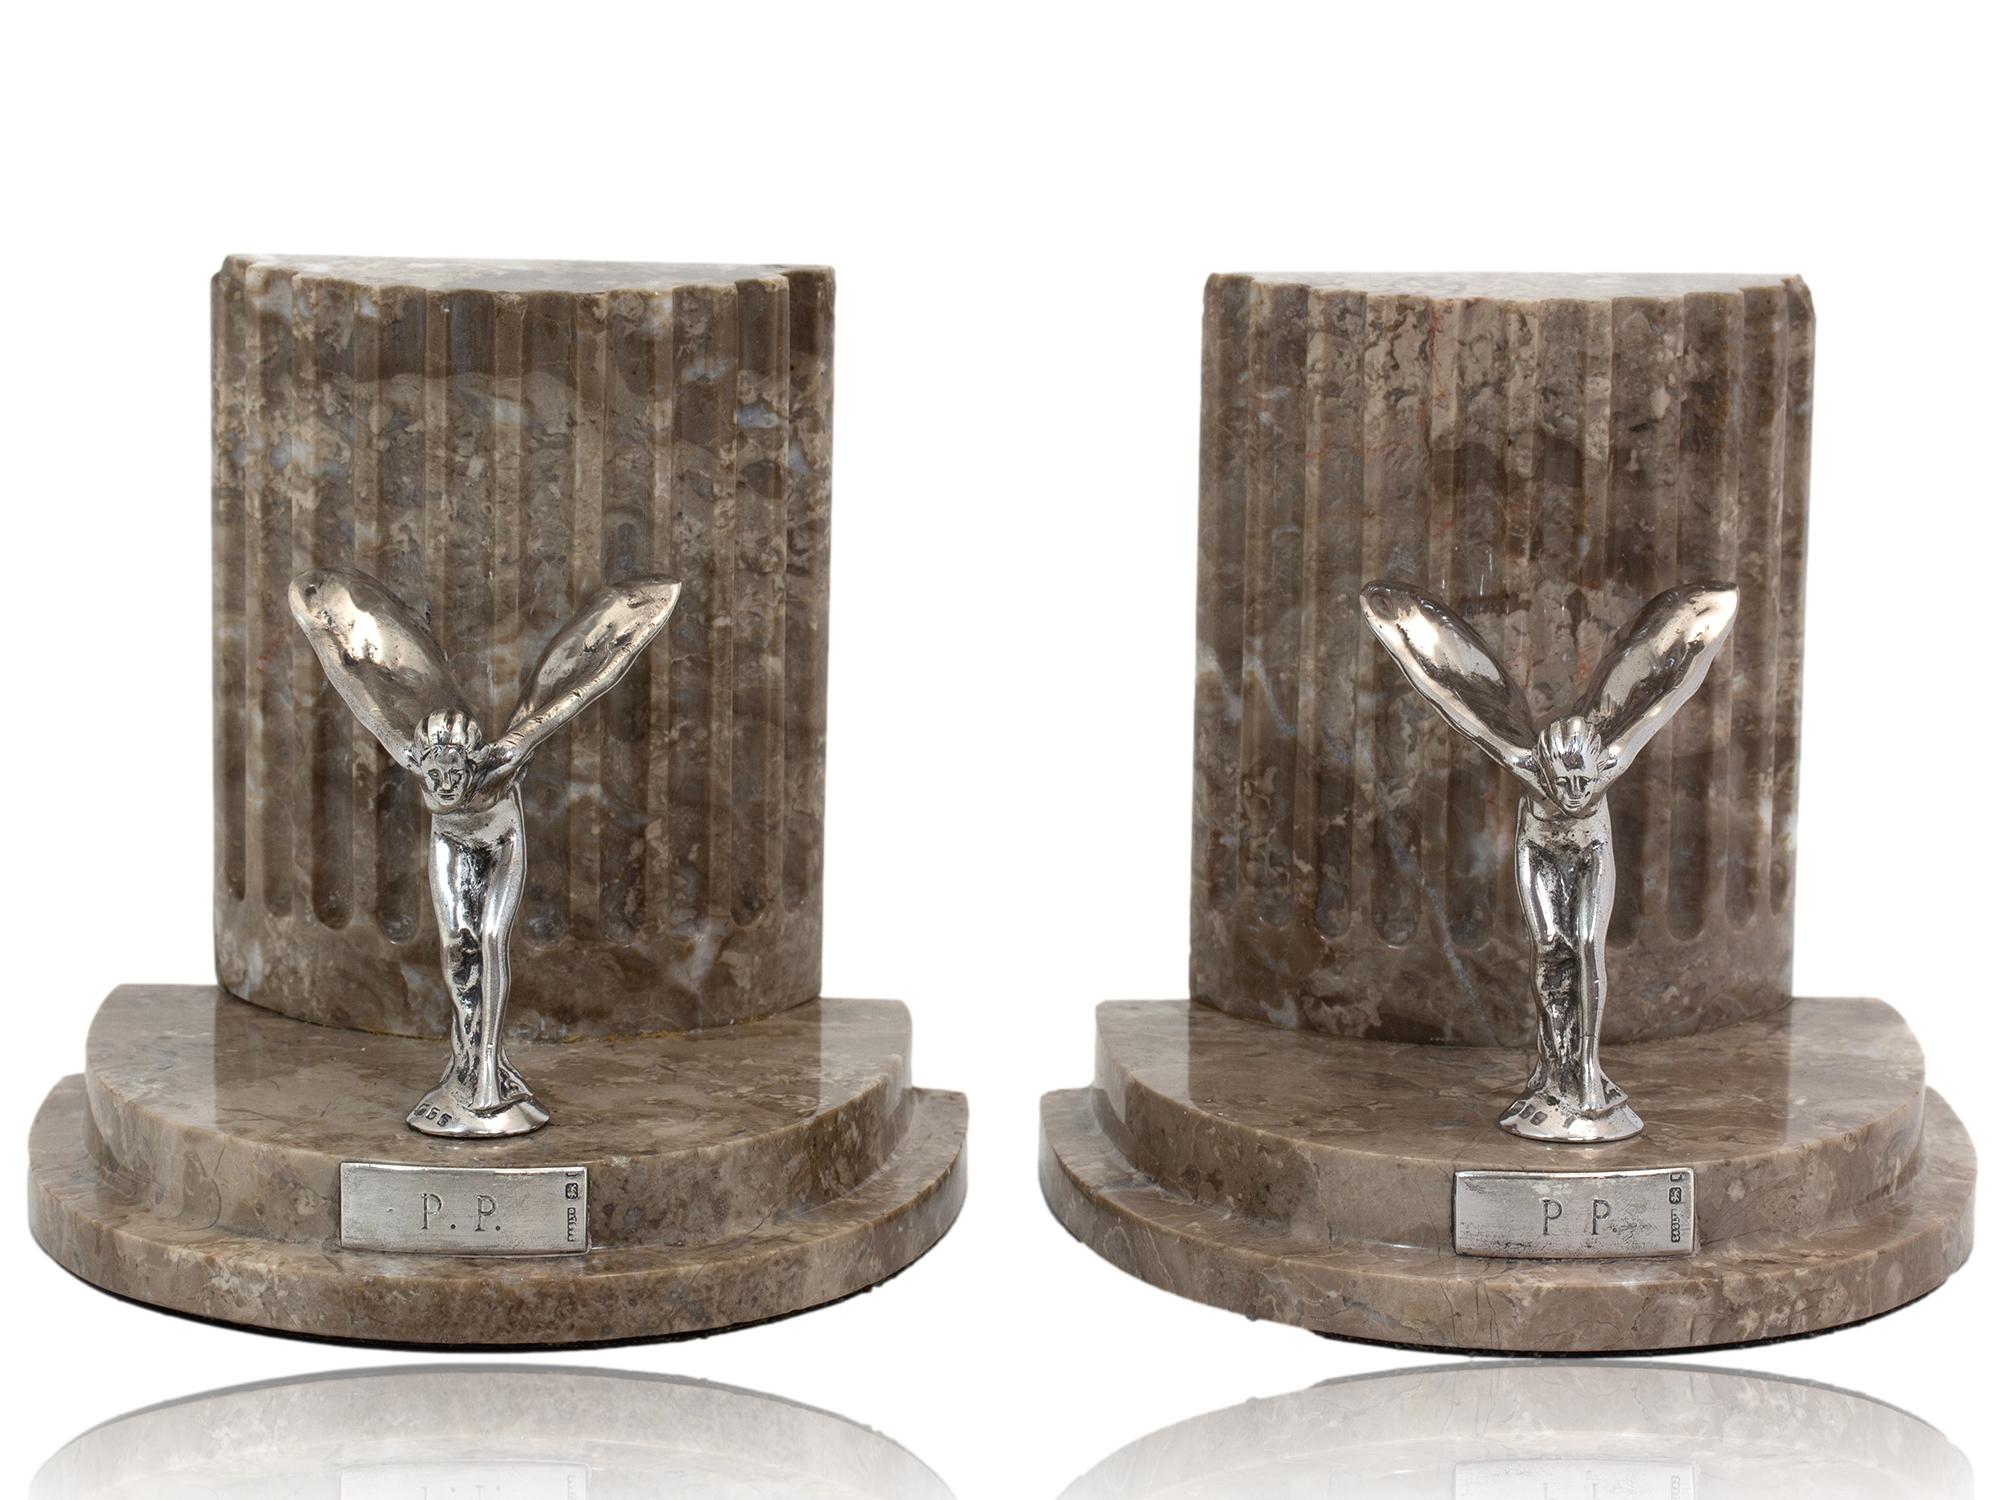 Art Deco Rolls Royce Comissioned Silver Spirit of Ecstasy Book Ends For Sale